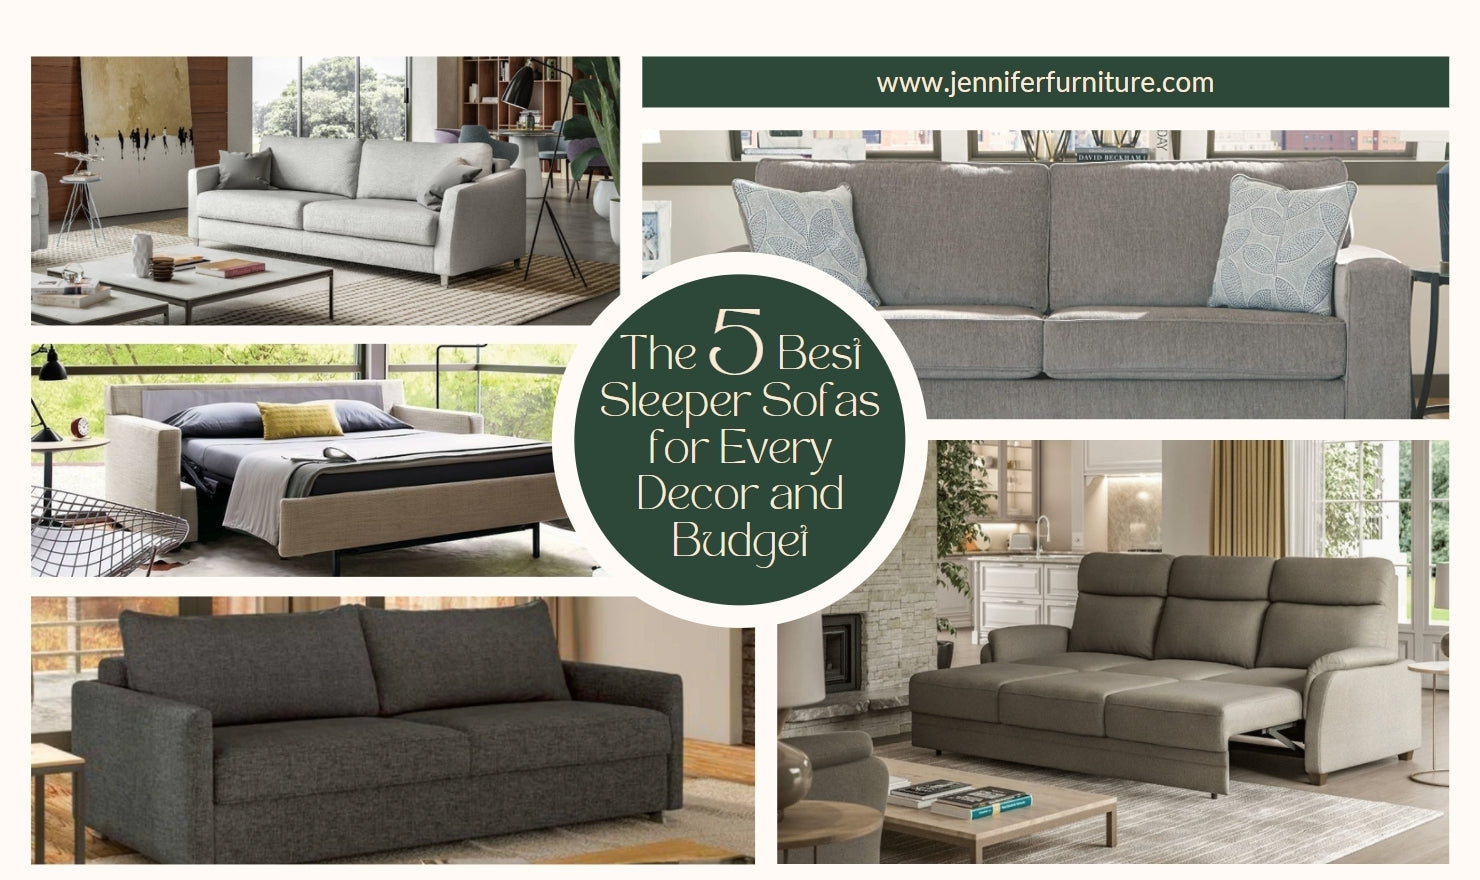 The 5 Best Sleeper Sofas for Every Decor and Budget